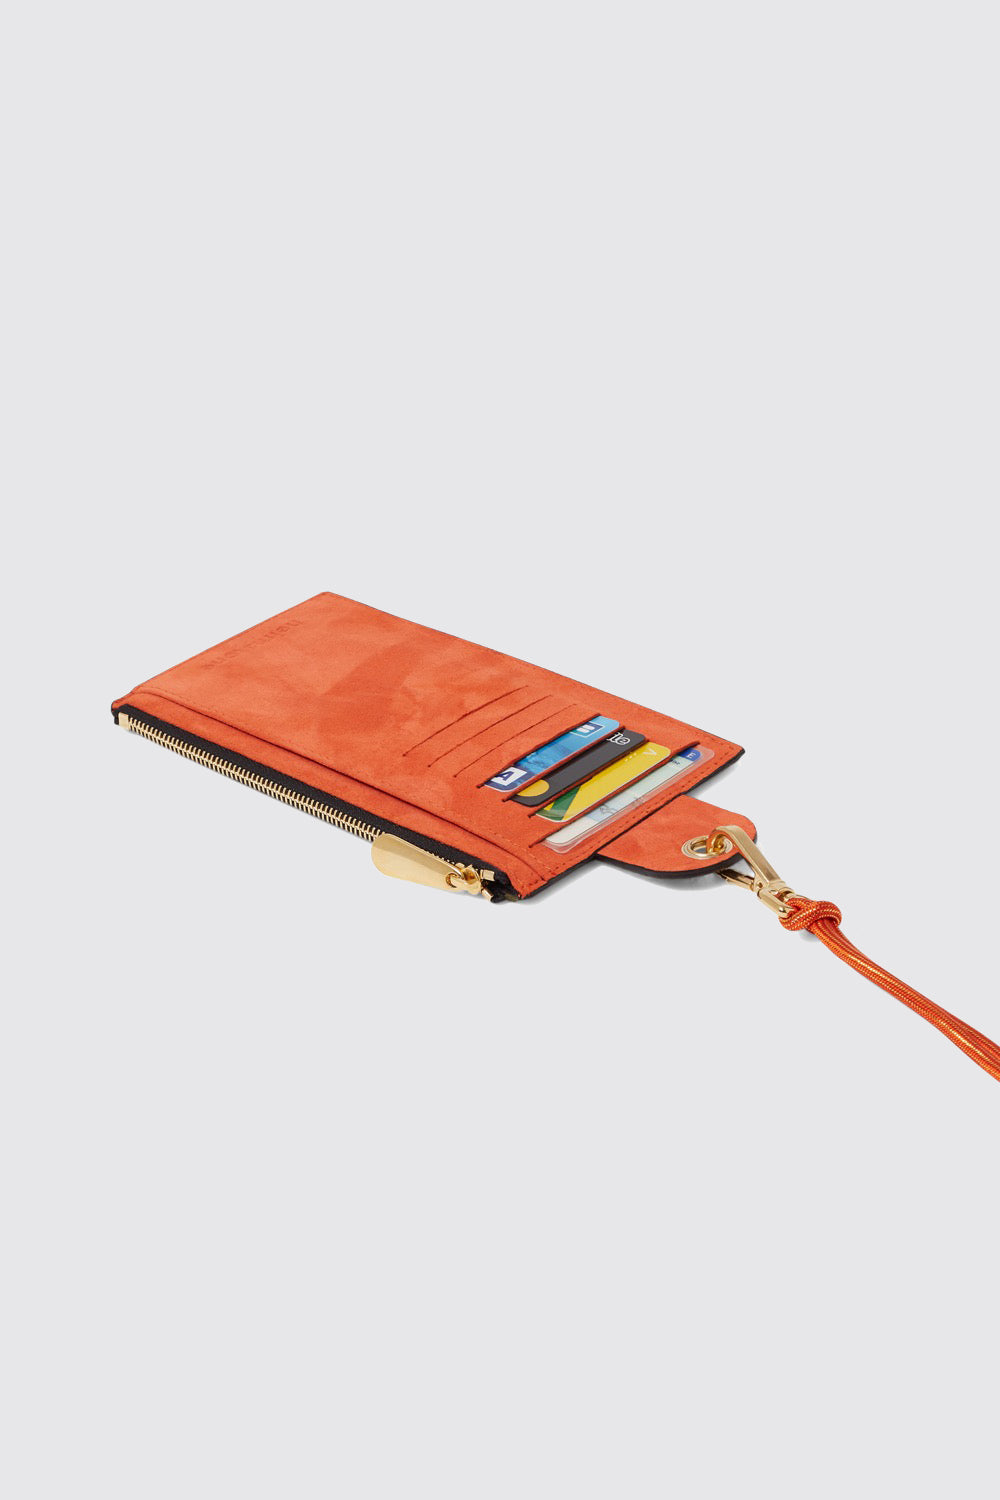 The Minis - Large neck wallet in orange Camouflage printed leather